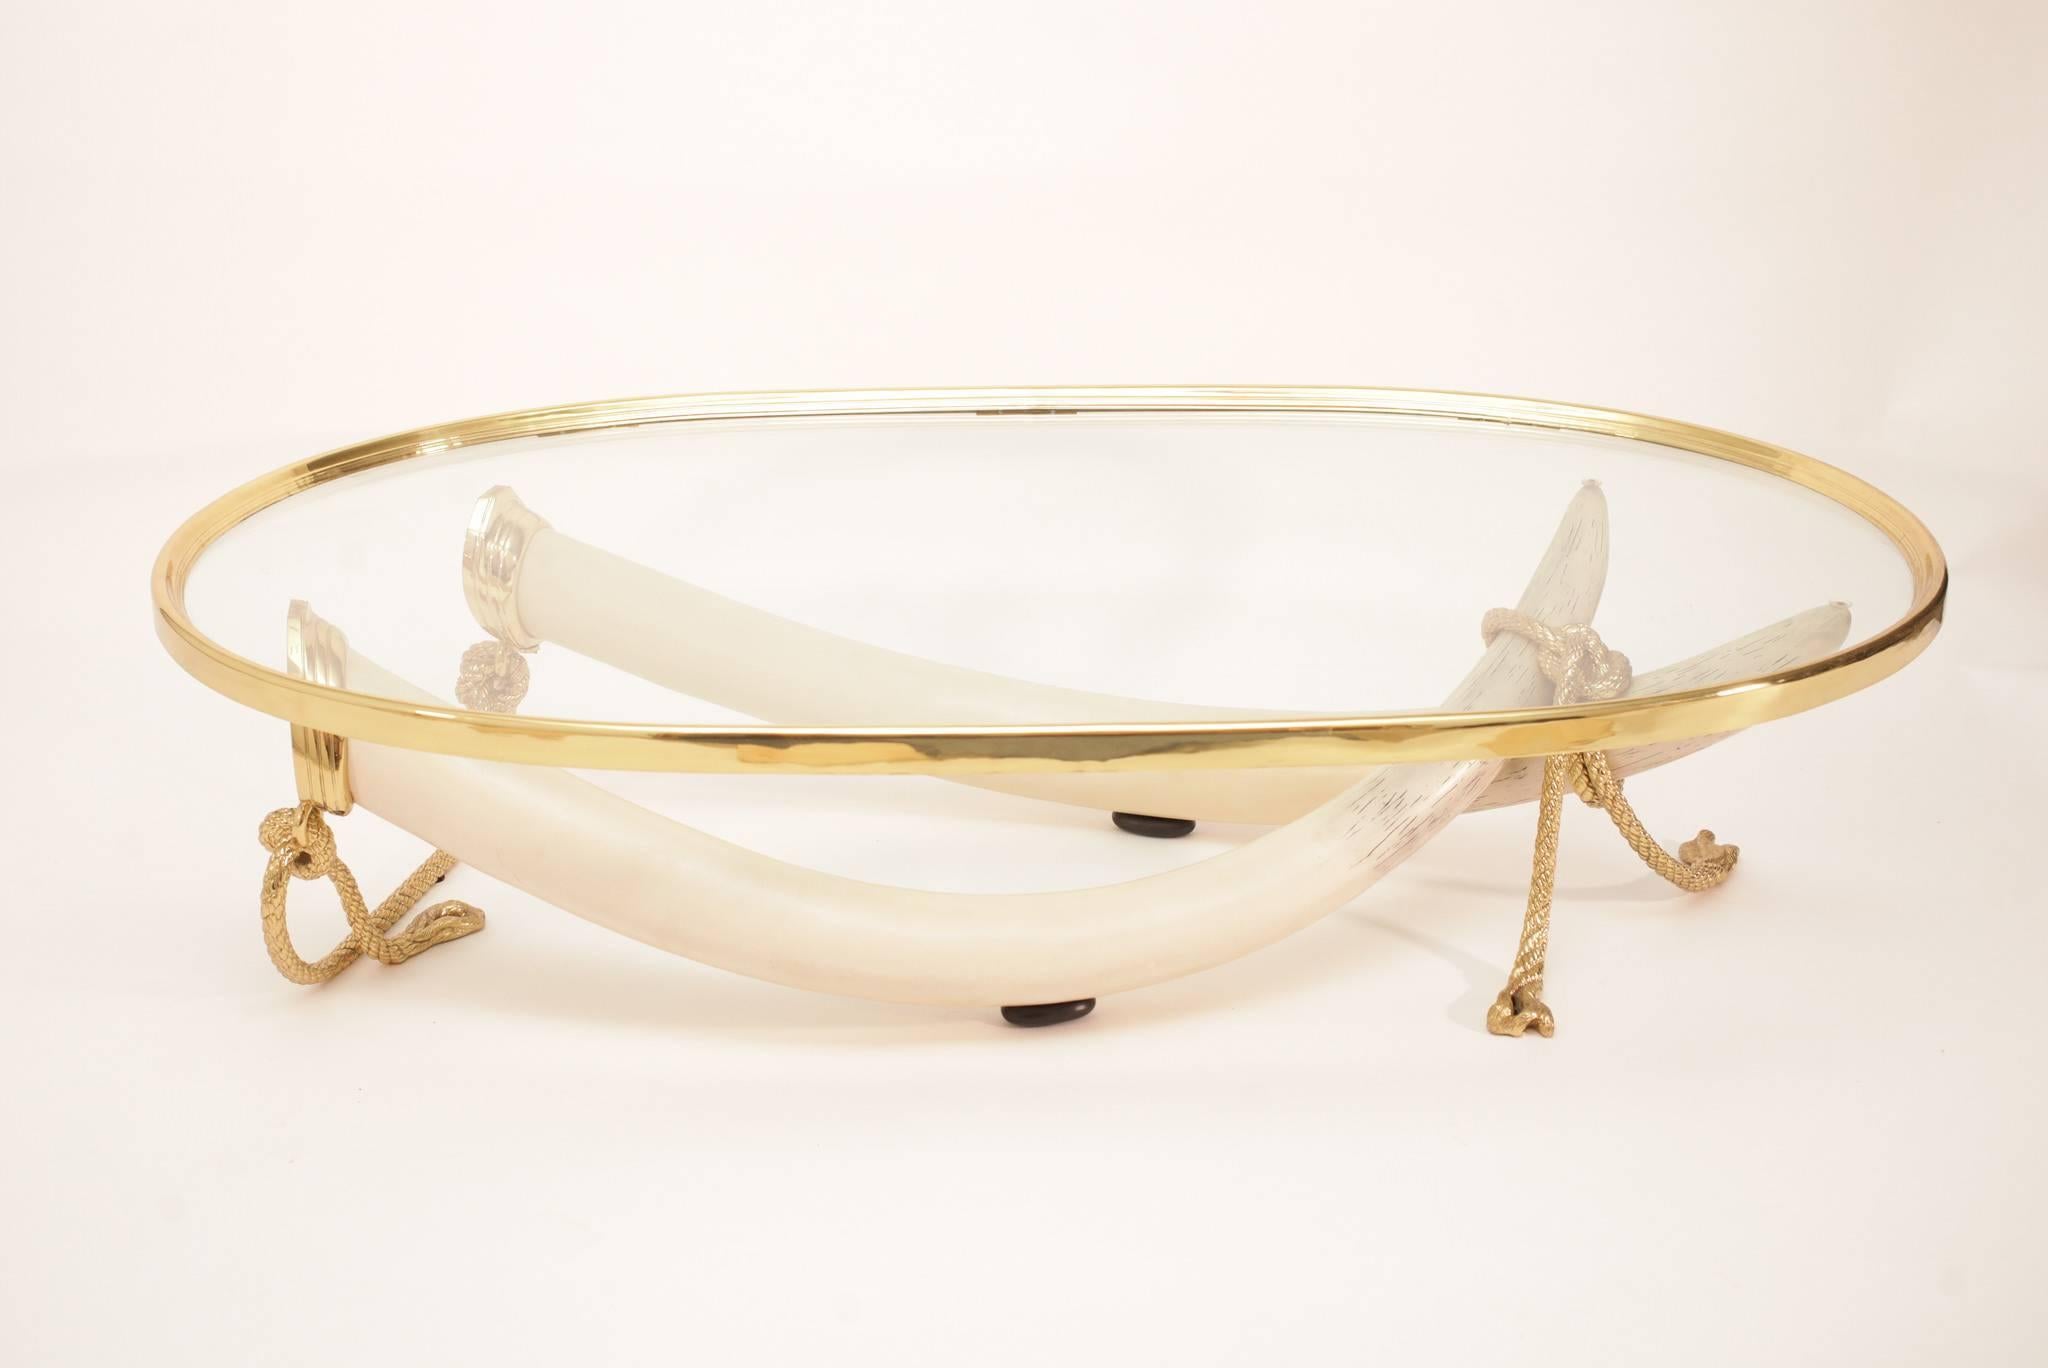 A chic Spanish 1970s signed Valenti faux elephant tusk table with gleaming glass and solid bronze detailing.